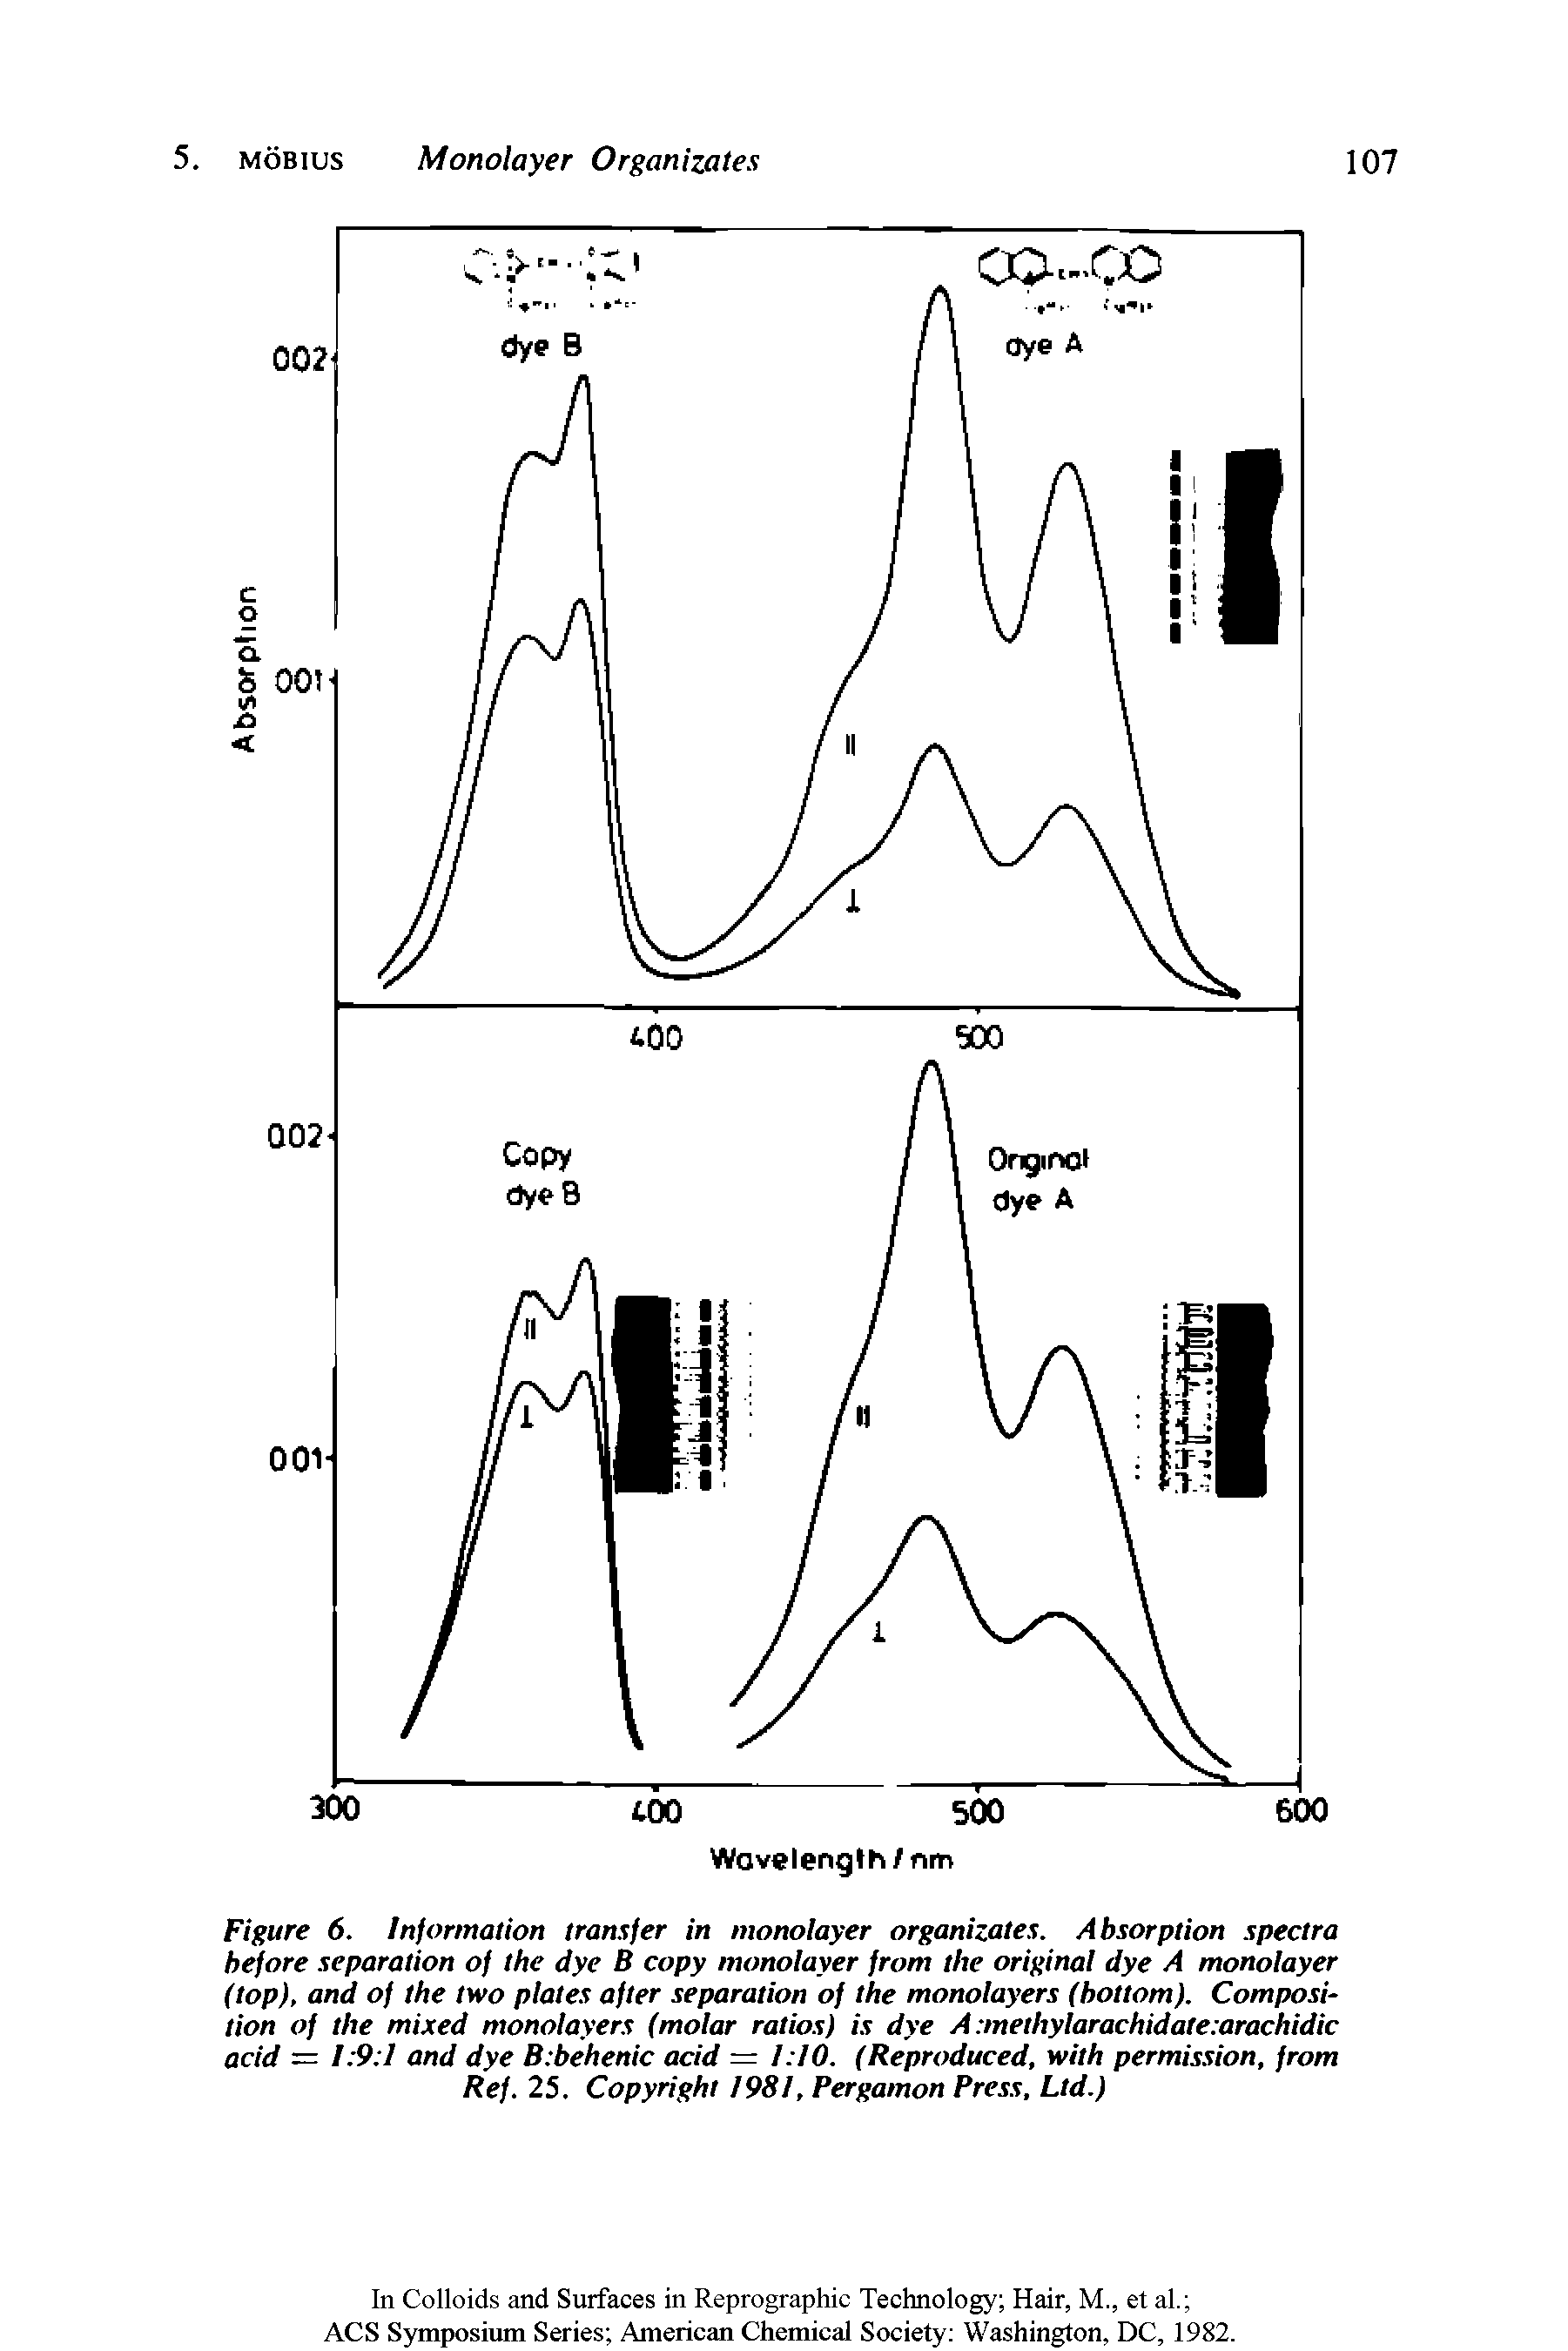 Figure 6. Information transfer in monolayer organizates. Absorption spectra before separation of the dye B copy monolayer from the original dye A monolayer (top), and of the two plates after separation of the monolayers (bottom). Composition of the mixed monolayers (molar ratios) is dye A methylarachidate arachidic acid — 1 9 1 and dye B behenic acid = 1 10. (Reproduced, with permission, from Ref. 25. Copyright 1981, Pergamon Press, Ltd.)...